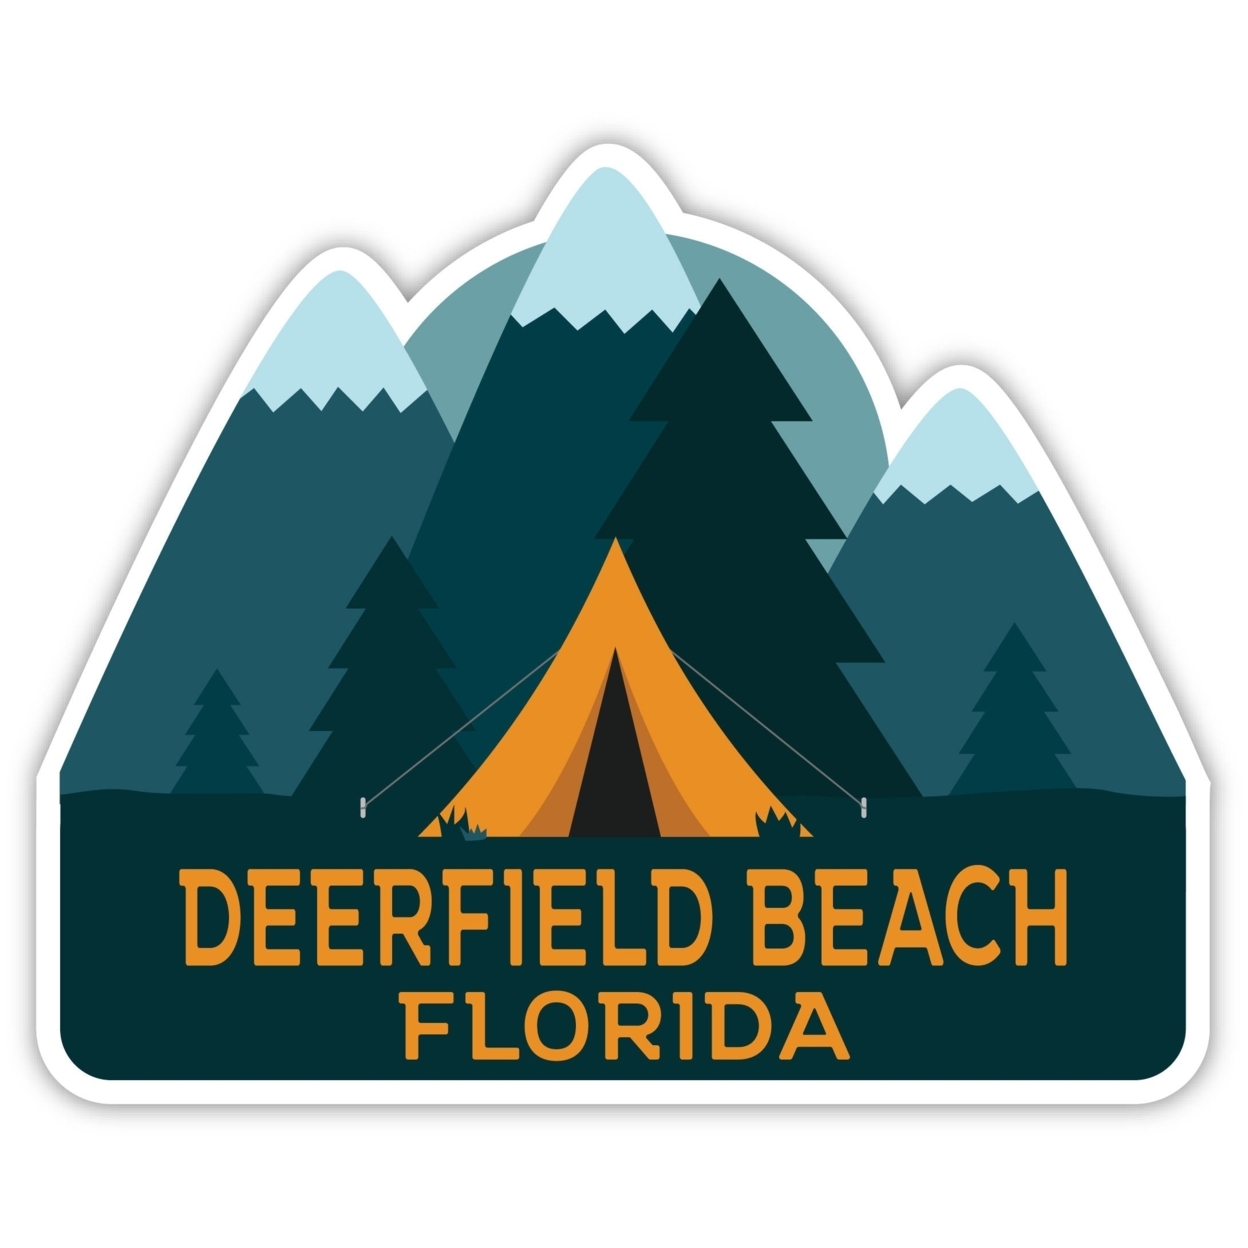 Deerfield Beach Florida Souvenir Decorative Stickers (Choose Theme And Size) - 4-Pack, 8-Inch, Tent